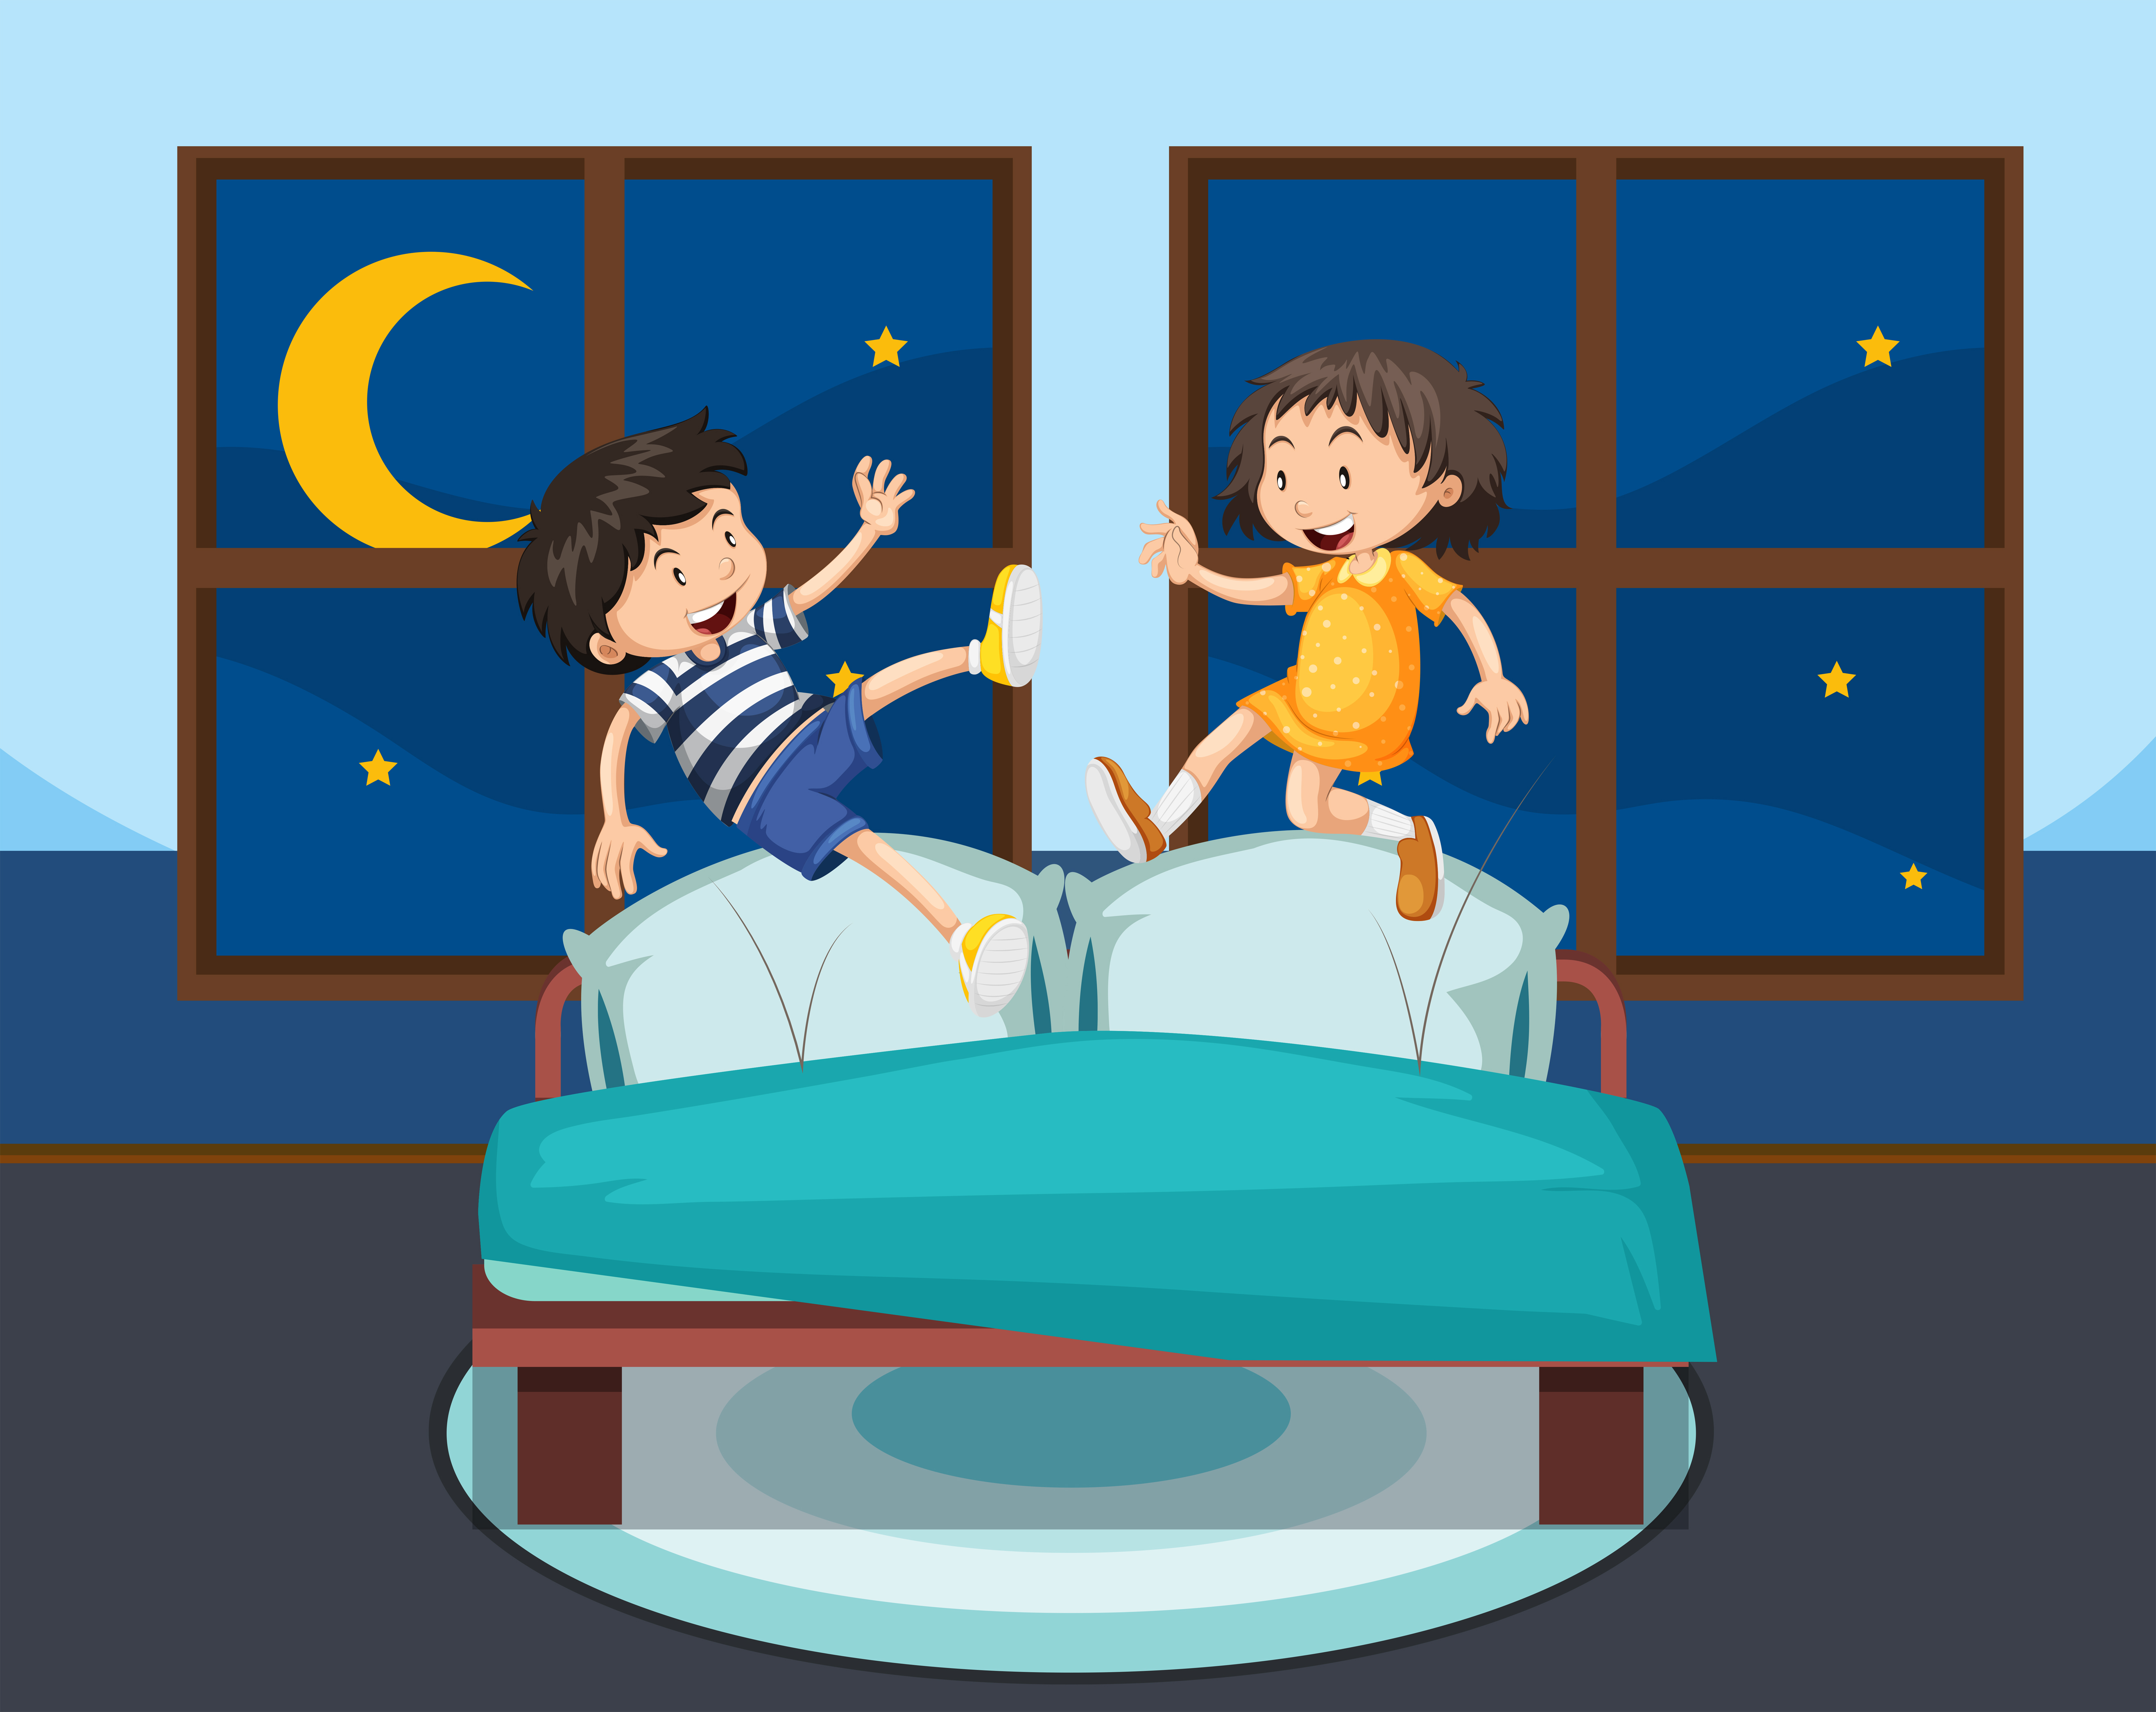 Girl And Boy Jumping On Bed Download Free Vectors Clipart Graphics Vector Art